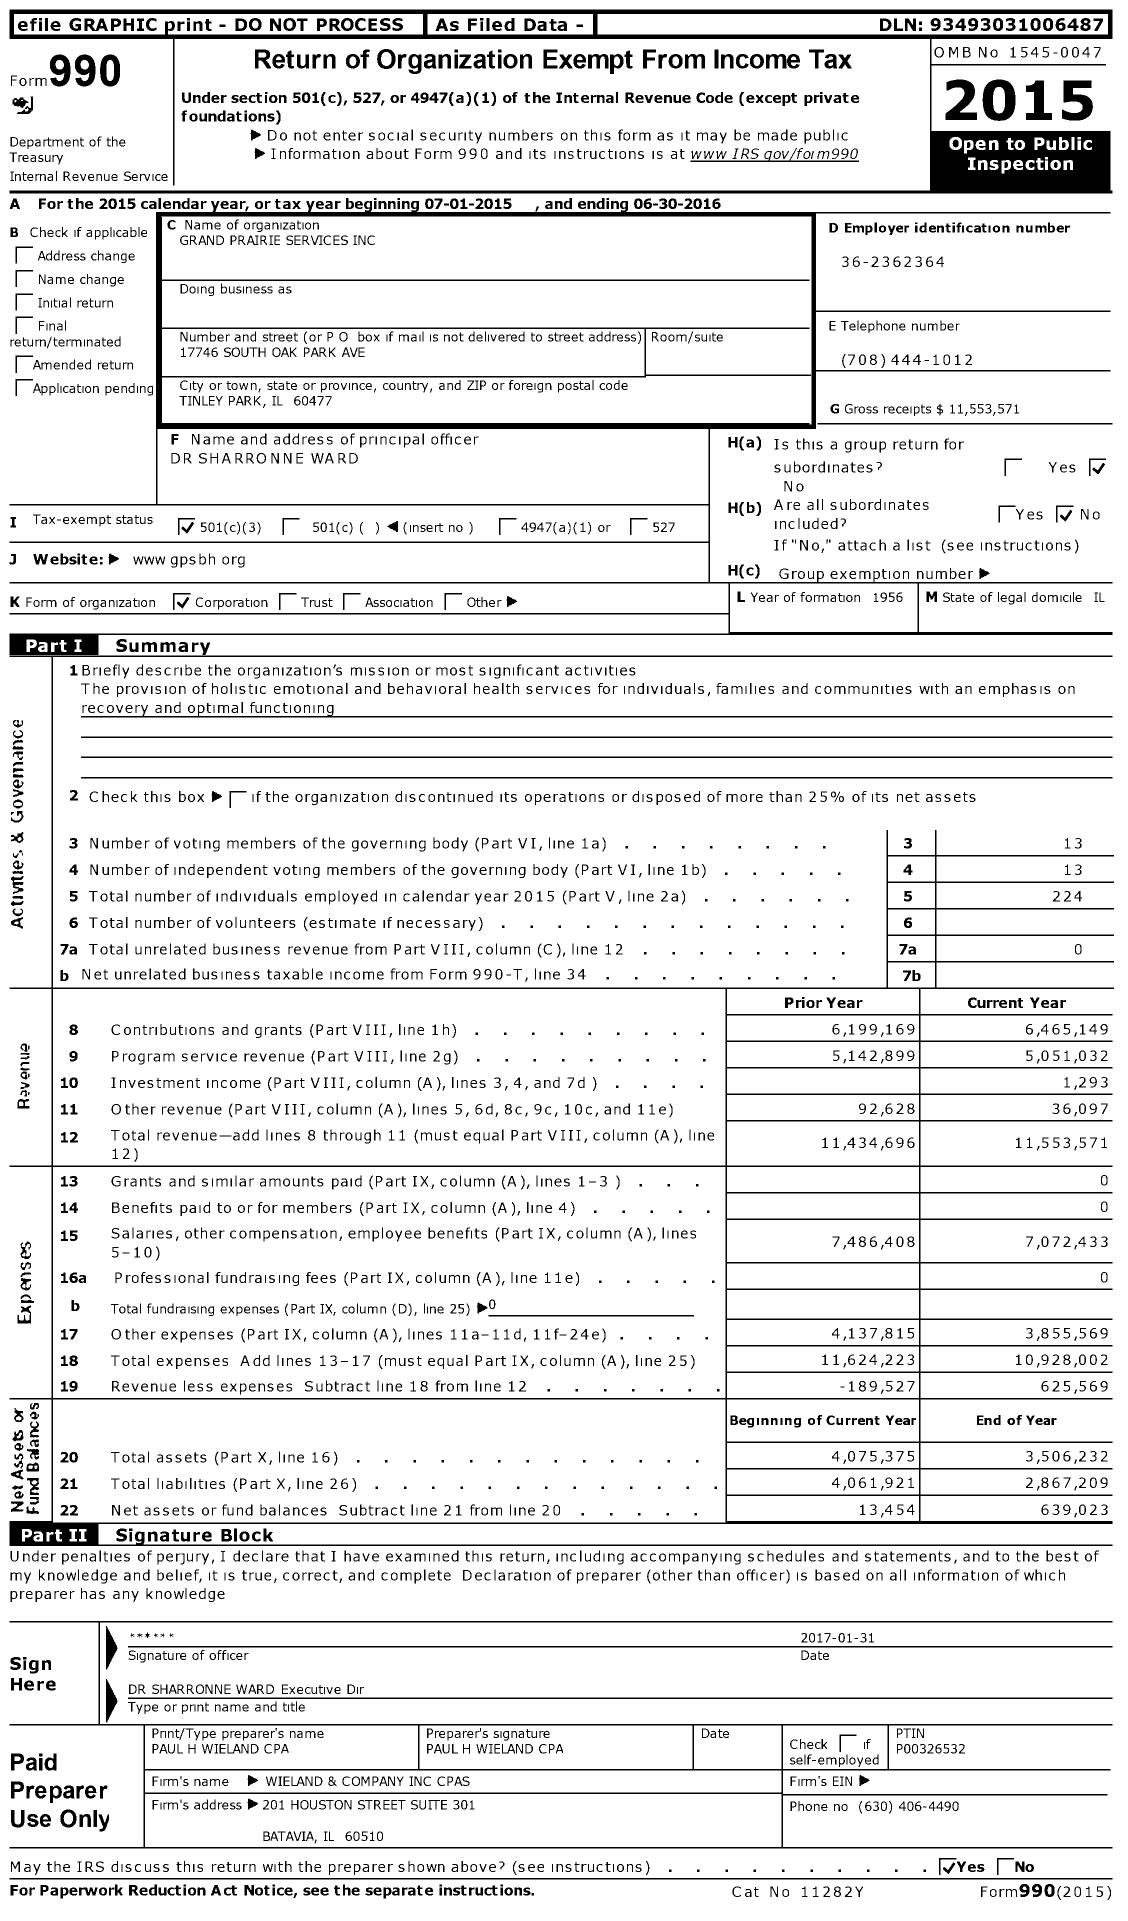 Image of first page of 2015 Form 990 for Grand Prairie Services